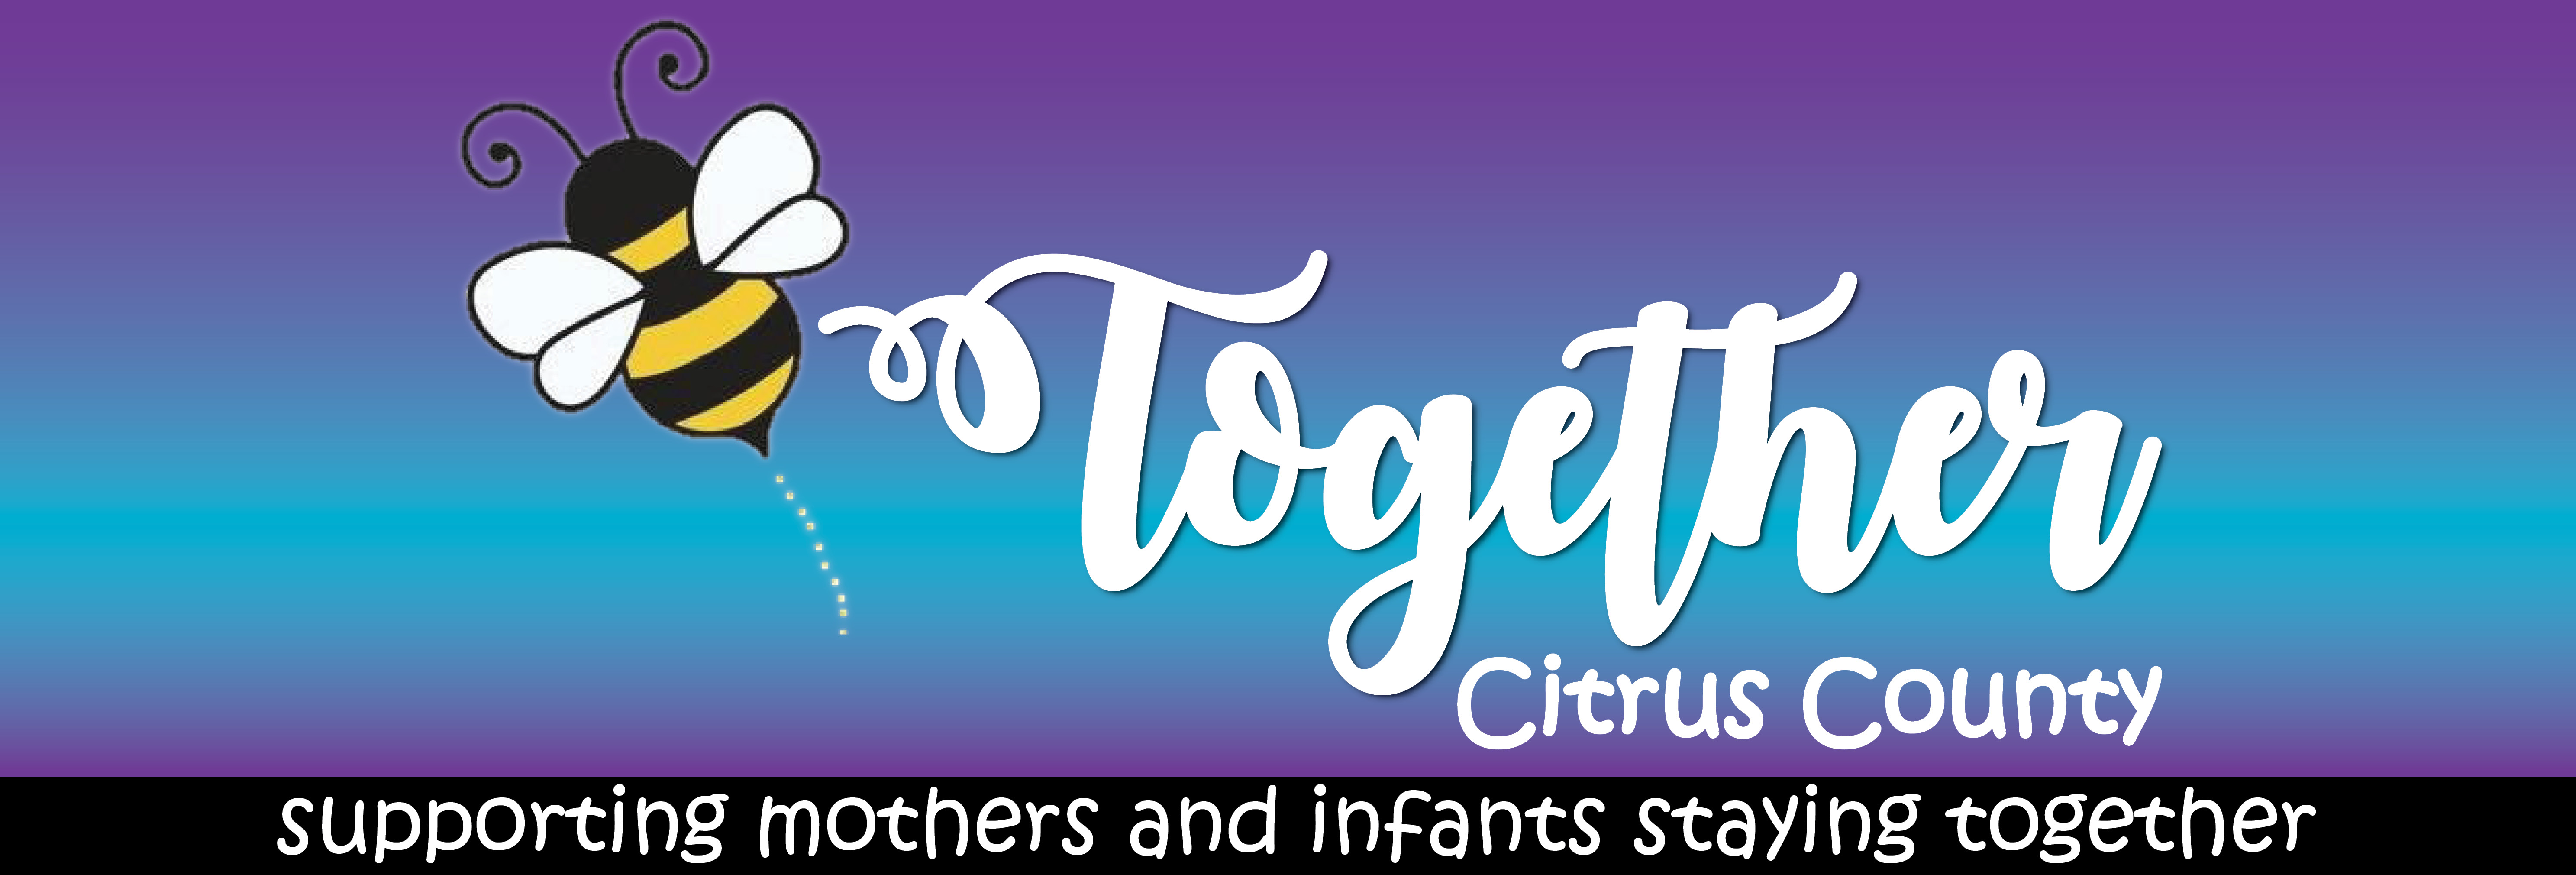 Image shows a bee with the text: Together Citrus County supporting mothers and infants staying together